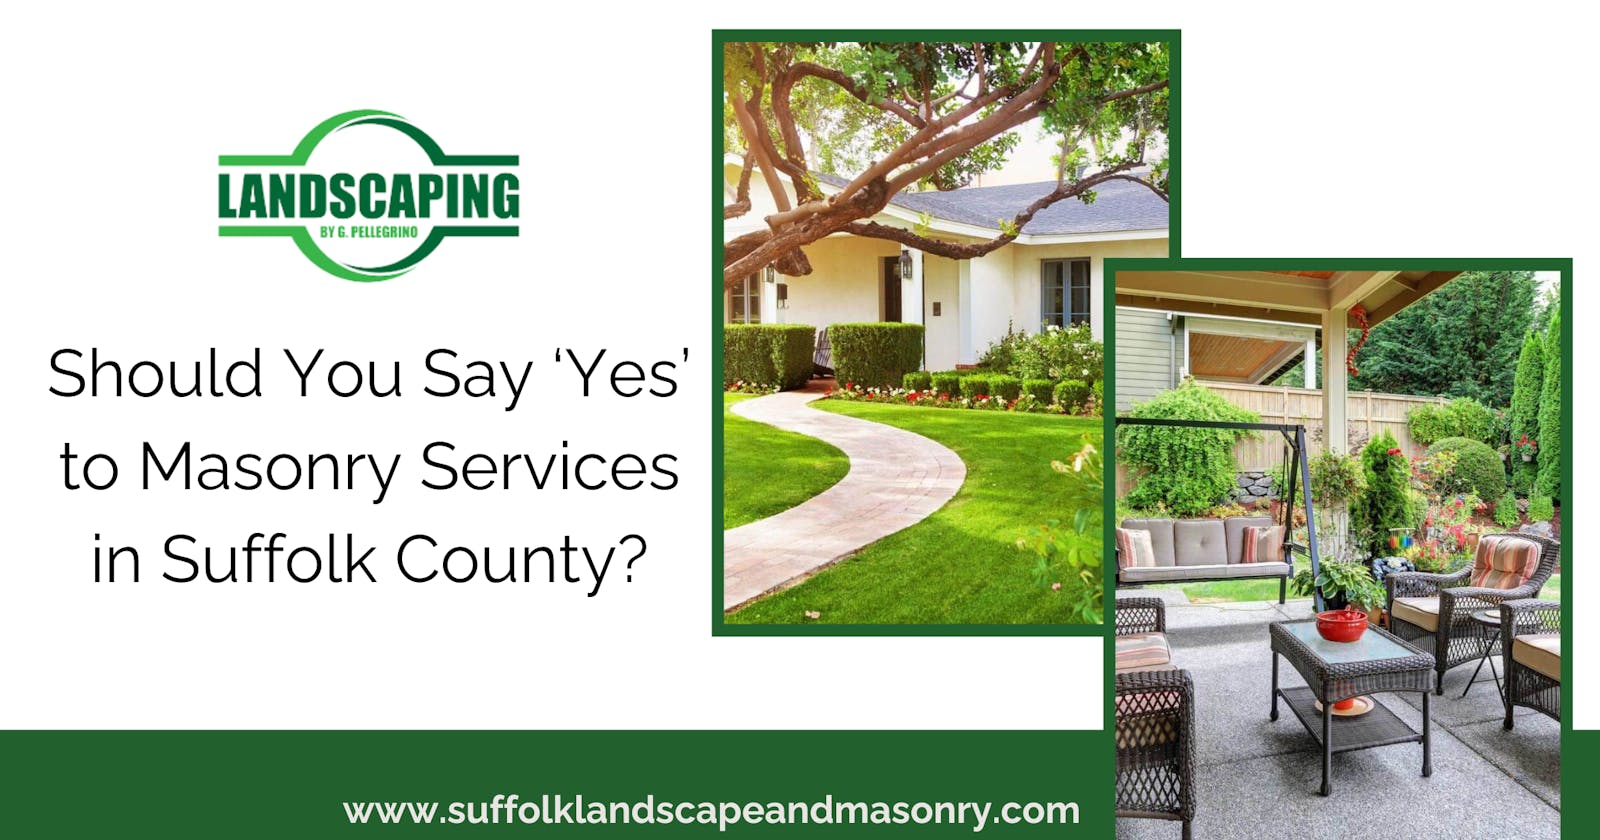 Should You Say ‘Yes’ to Masonry Services in Suffolk County?